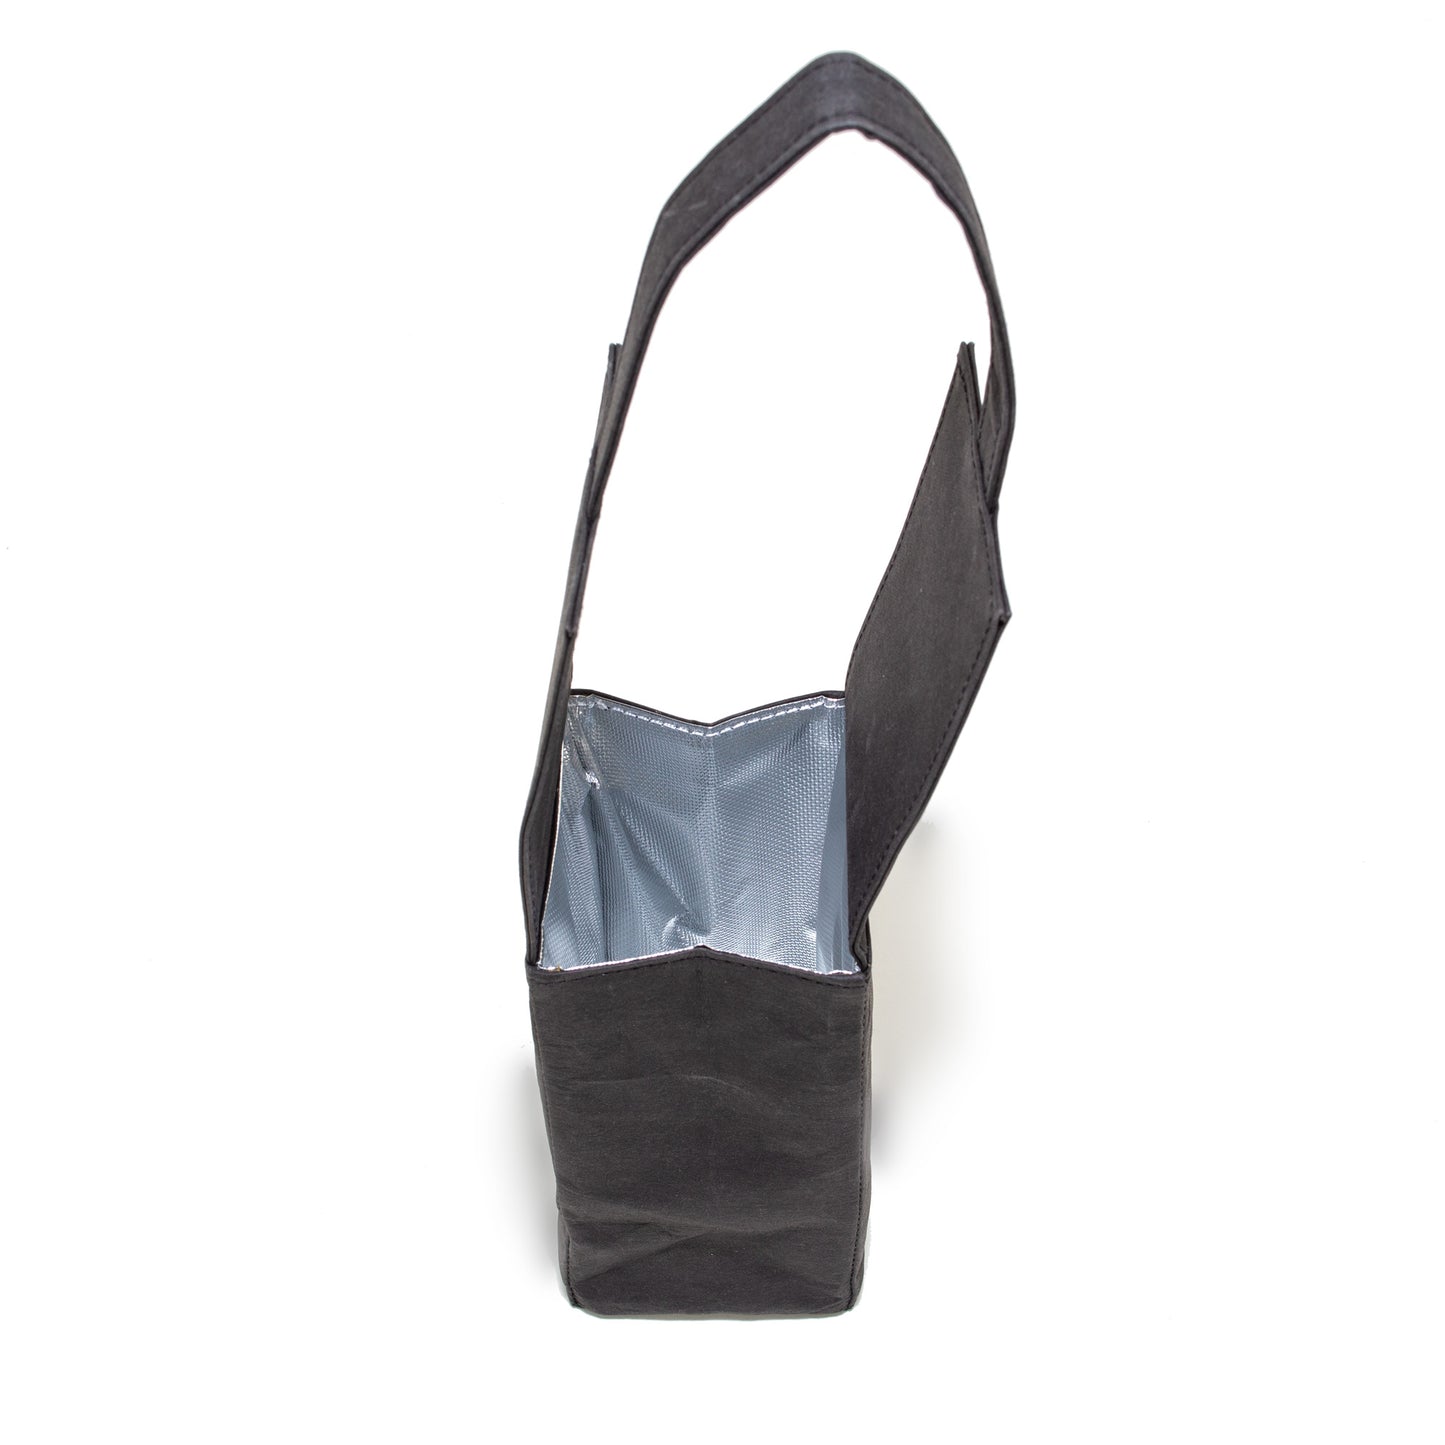 SoYoung Insulated Bottle Carrier Bag Black Washable Paper Singapore